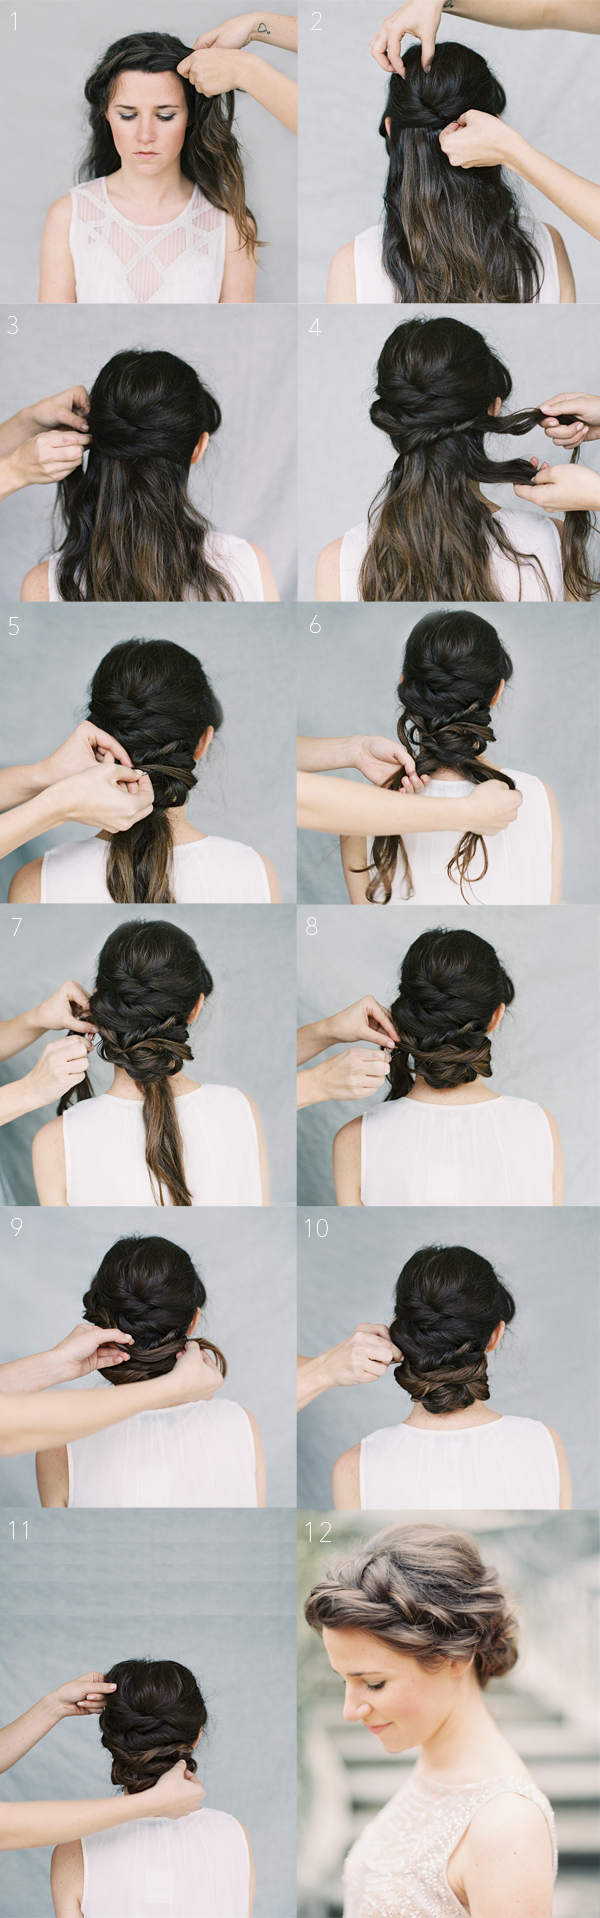 Hairstyles for Long Hair Step by Step-21